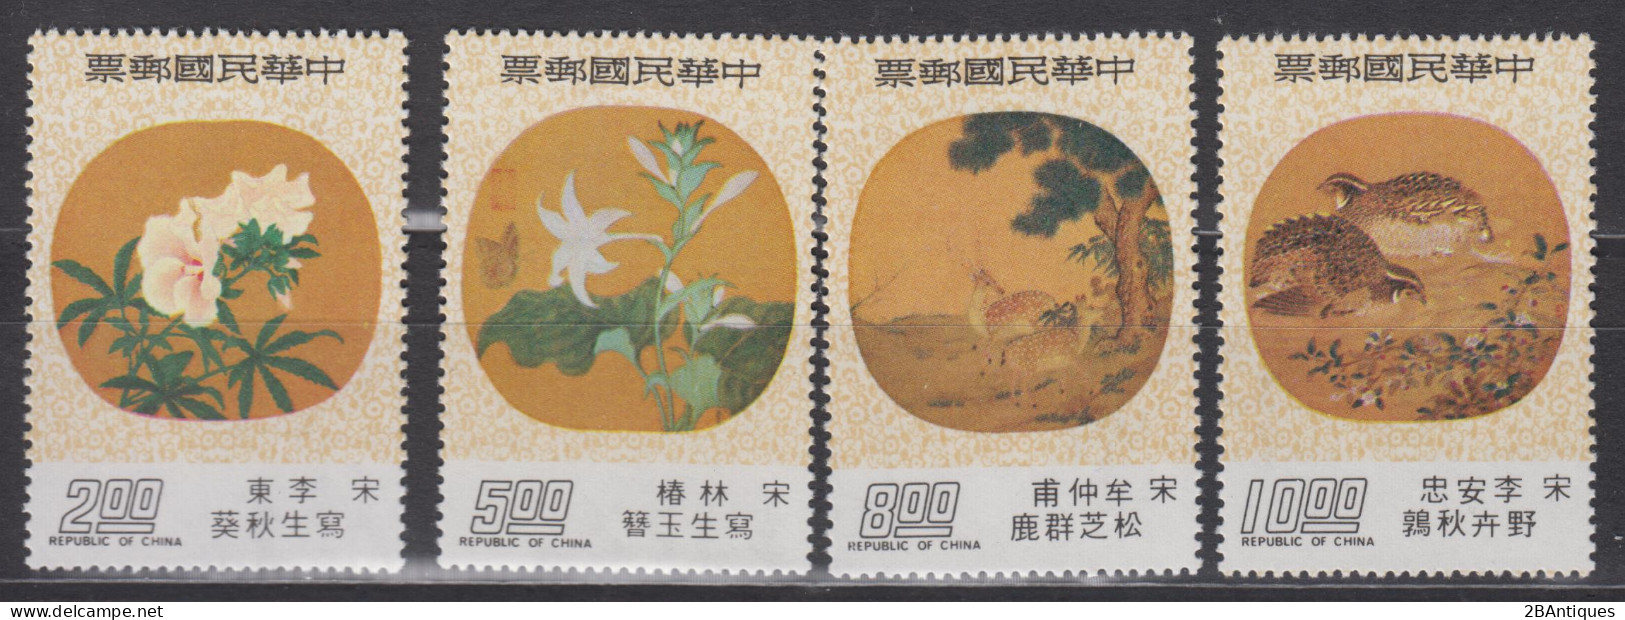 TAIWAN 1976 - Ancient Chinese Moon-shaped Fan Paintings MNH** OG XF - Nuovi